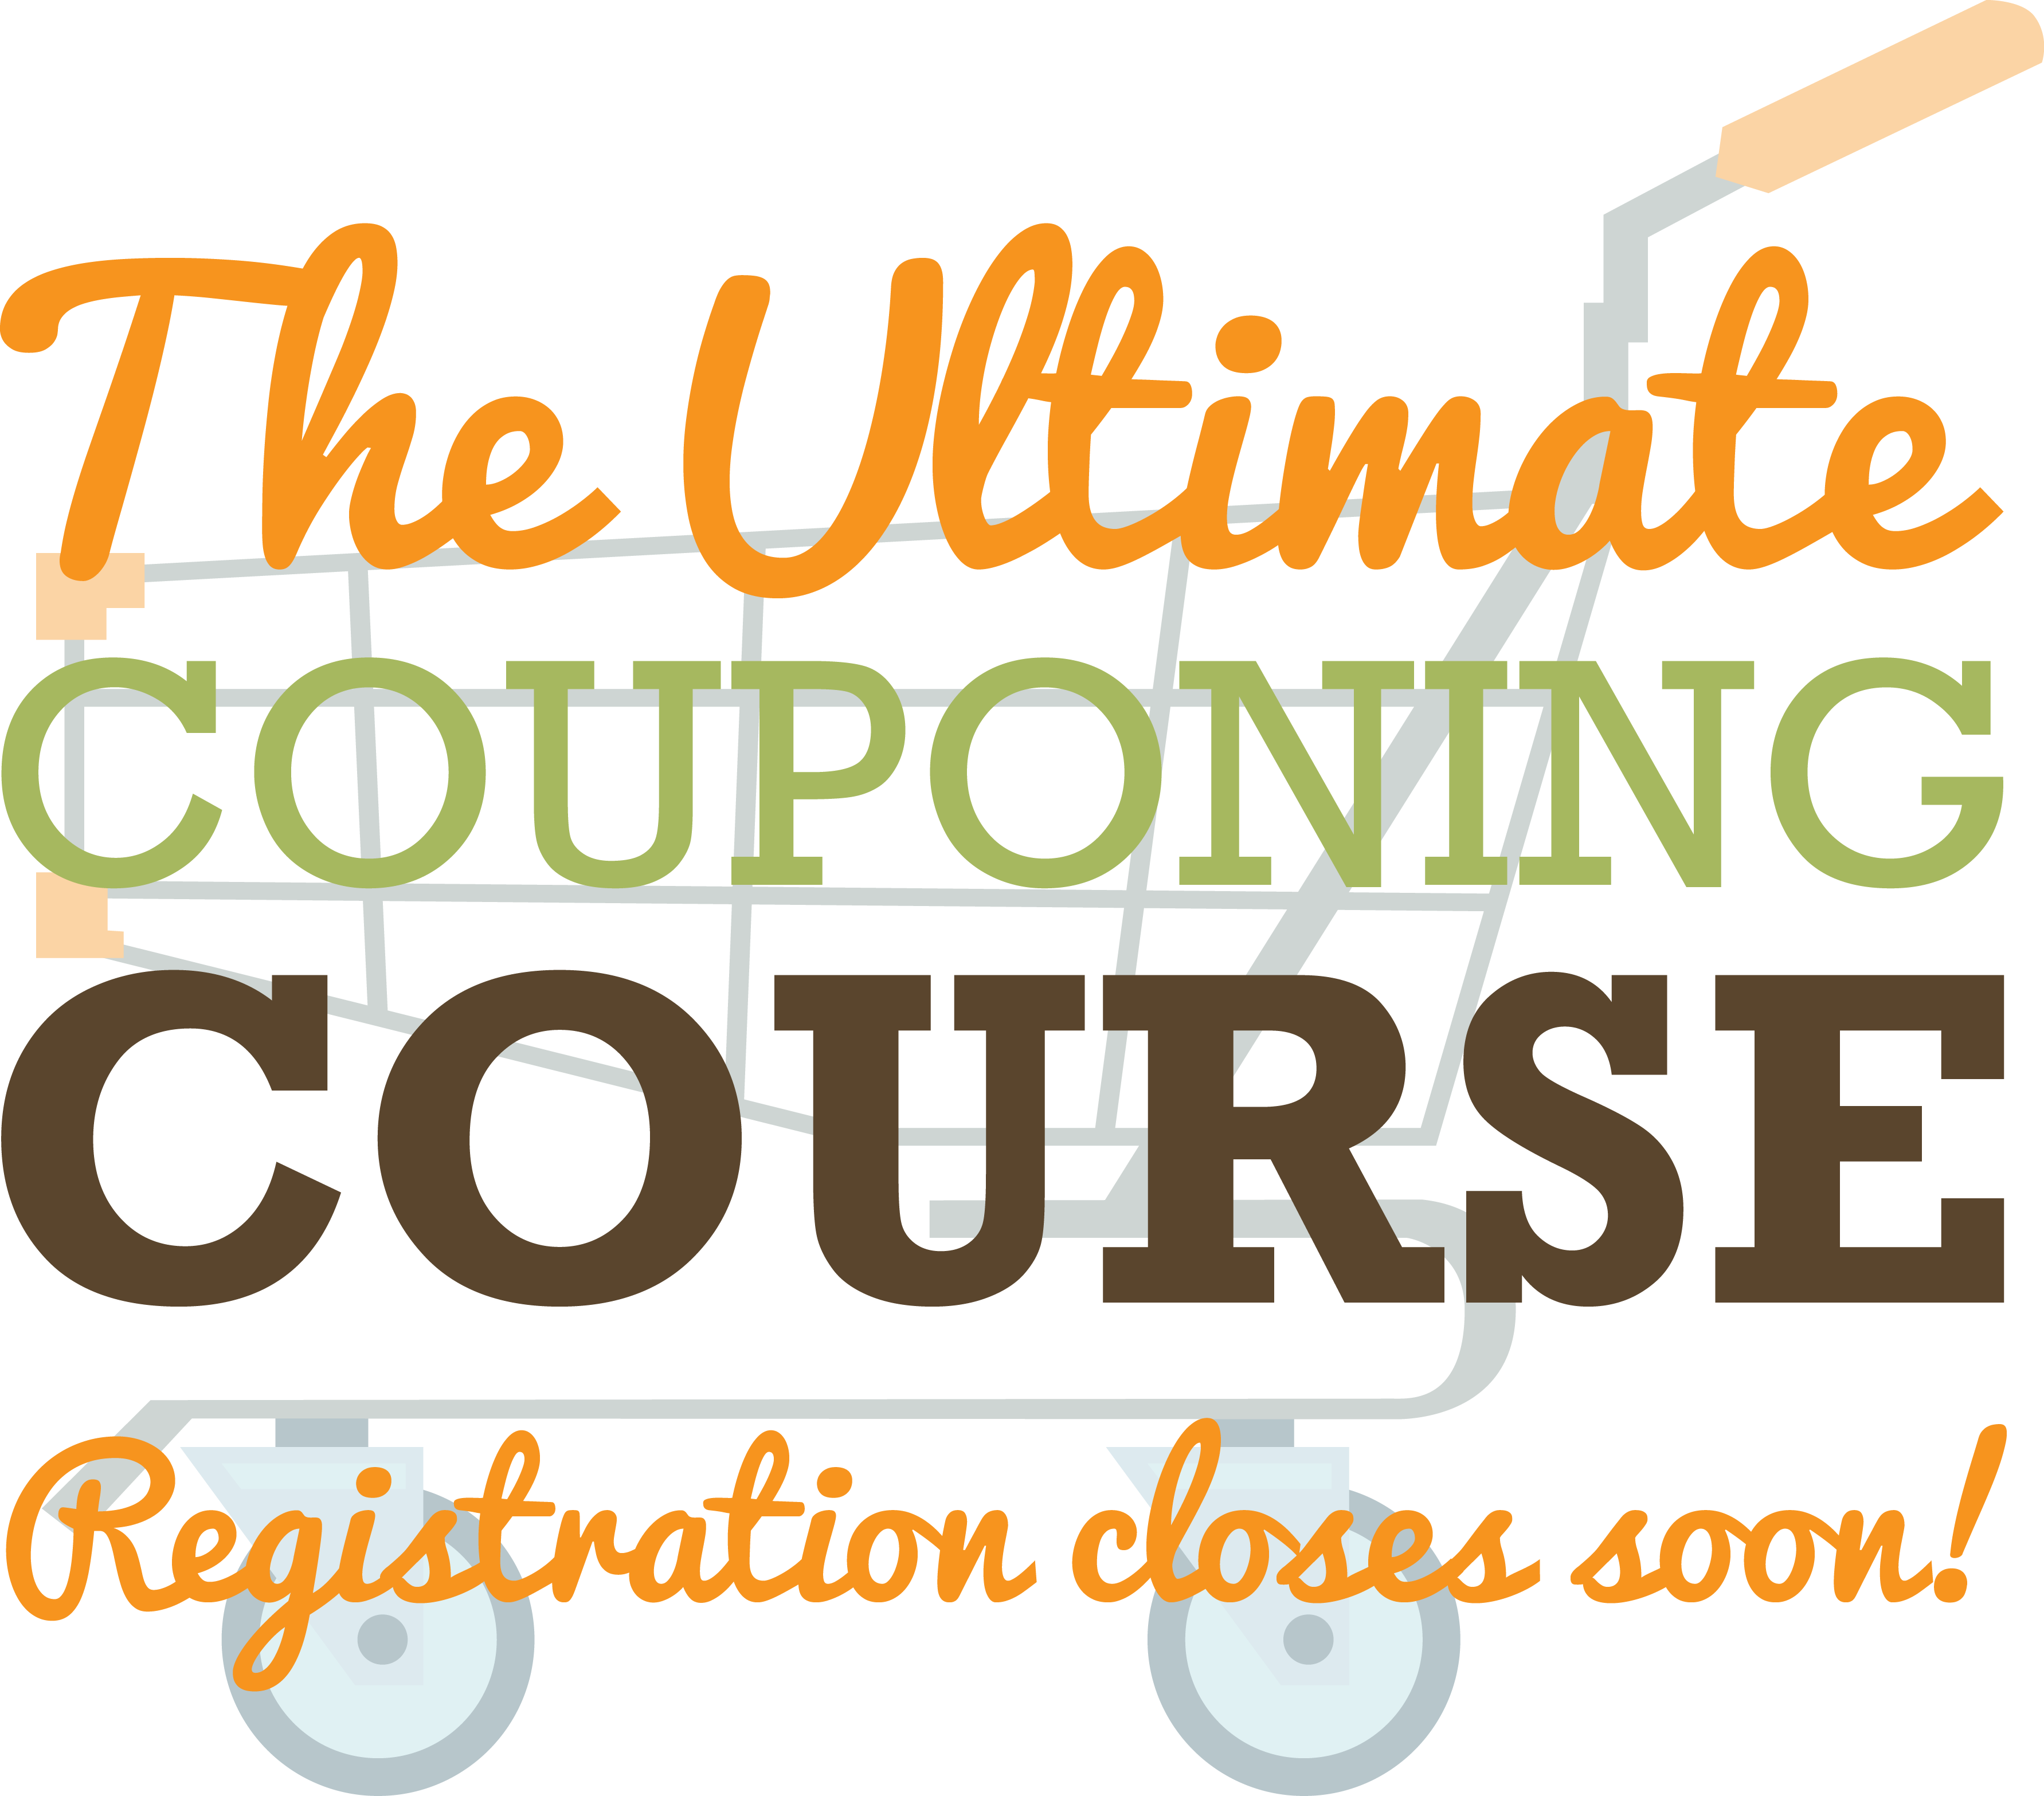 The Ultimate Couponing Course -- Registration closes soon on this awesome course!